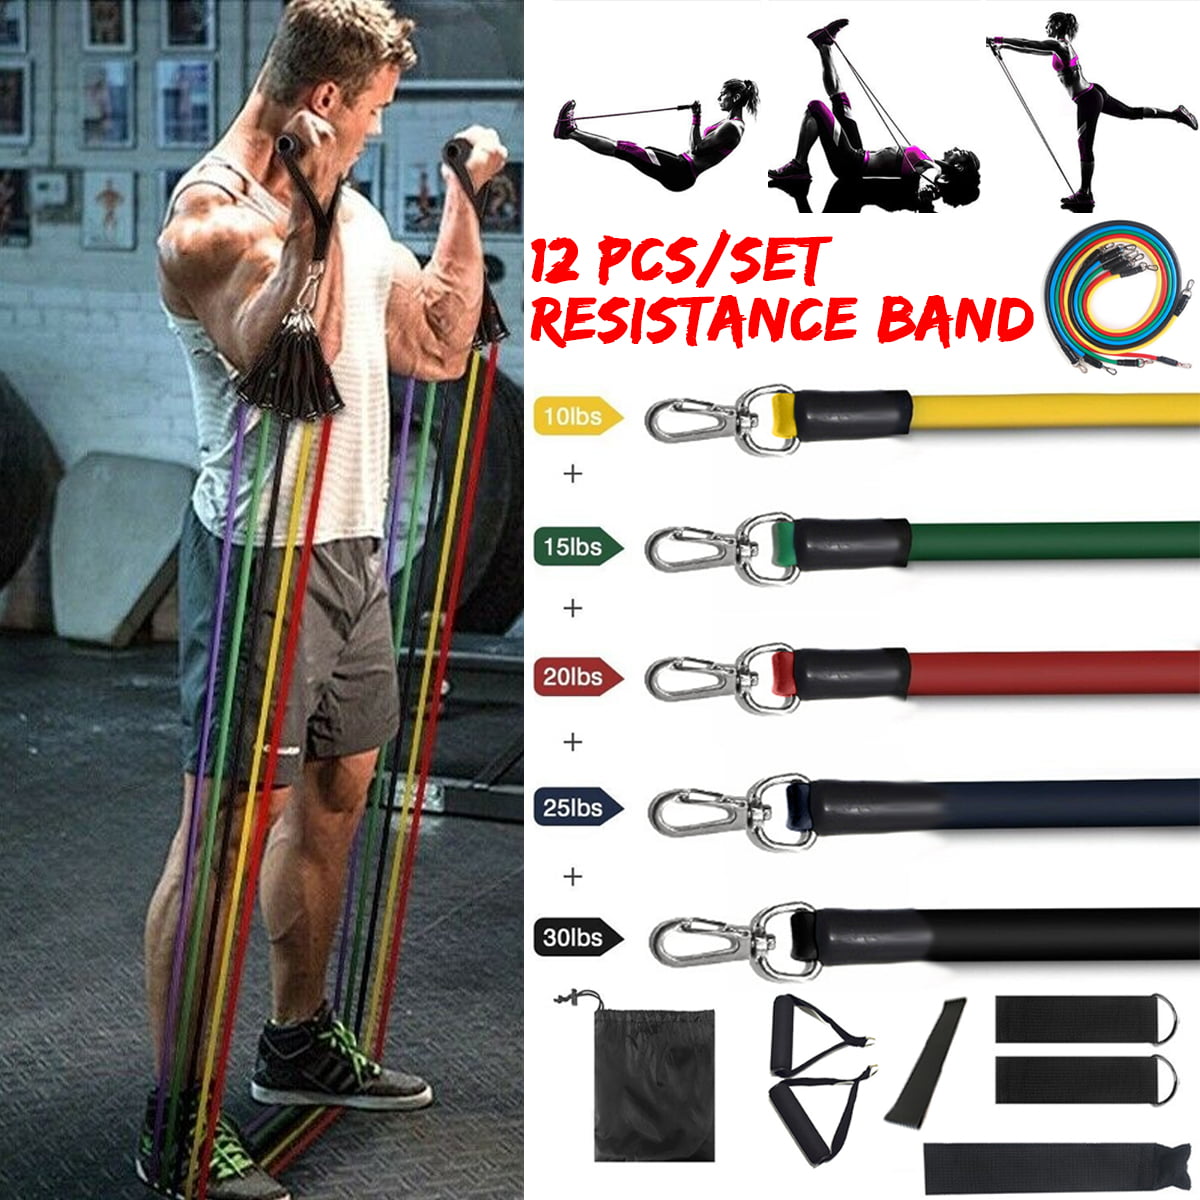 12PCS Resistance Band Training Exercise Fitness Tube Pull Rope Workout Bands US# 